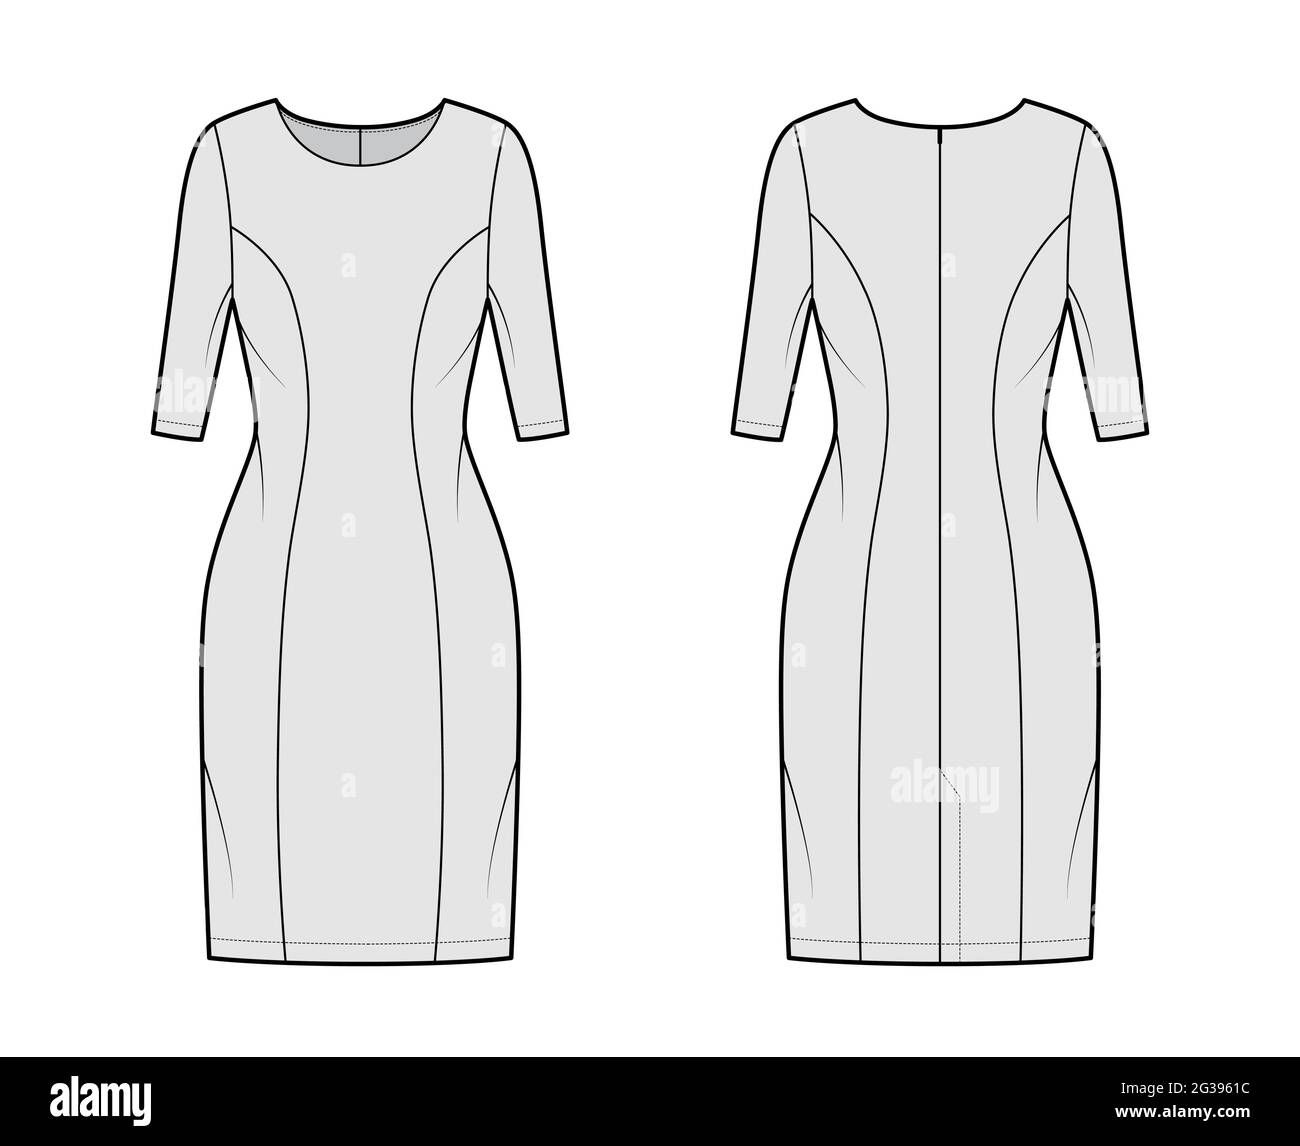 Dress princess line technical fashion illustration with elbow sleeves ...